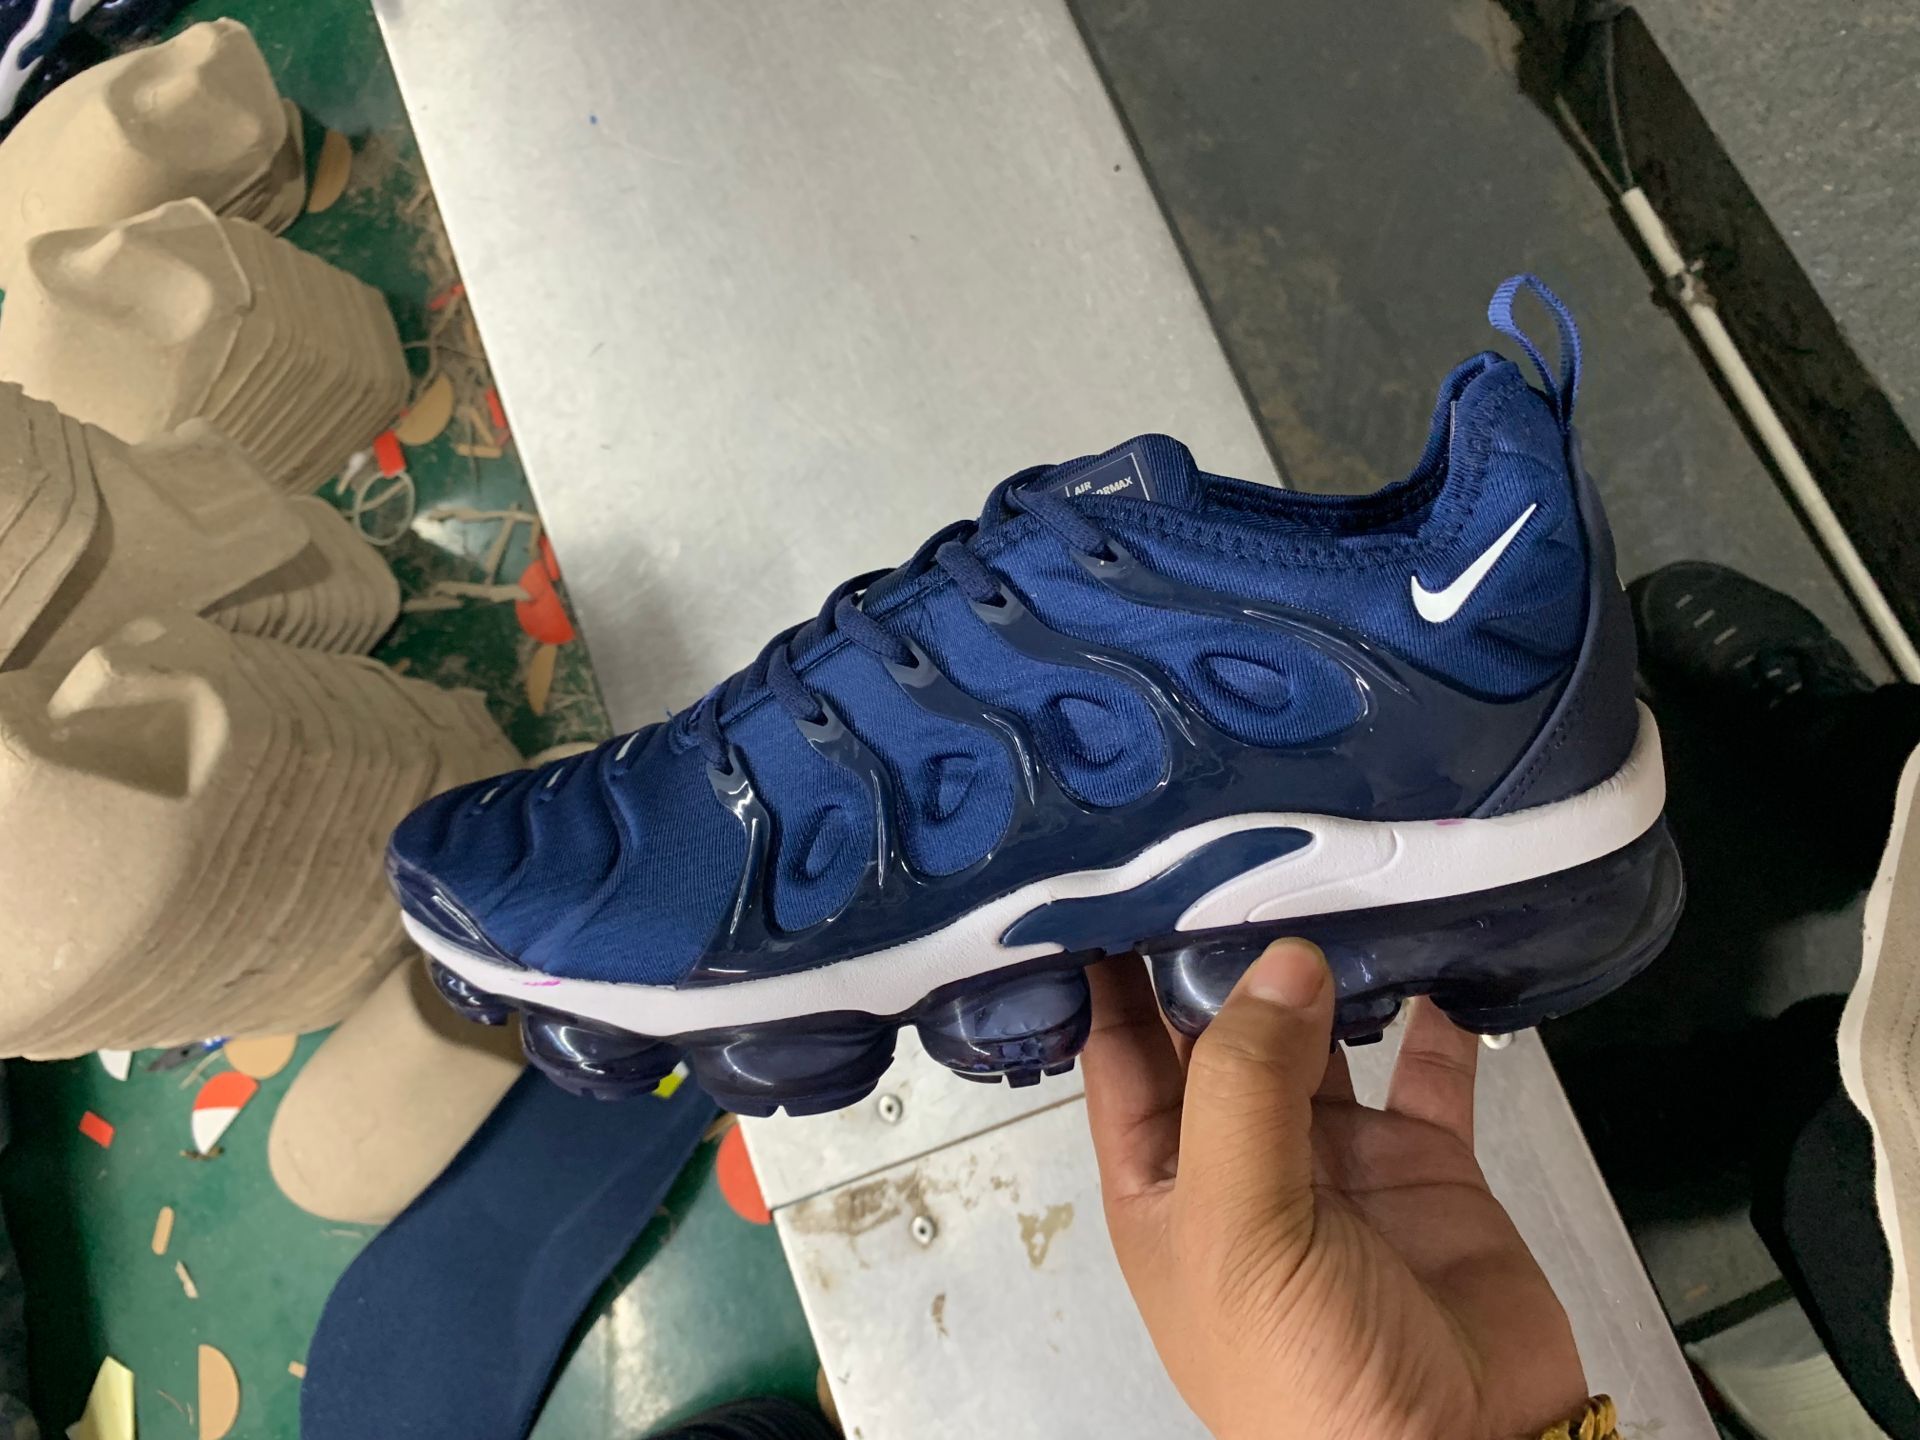 Men's Hot sale Running weapon Air Max TN 2019 Shoes 010